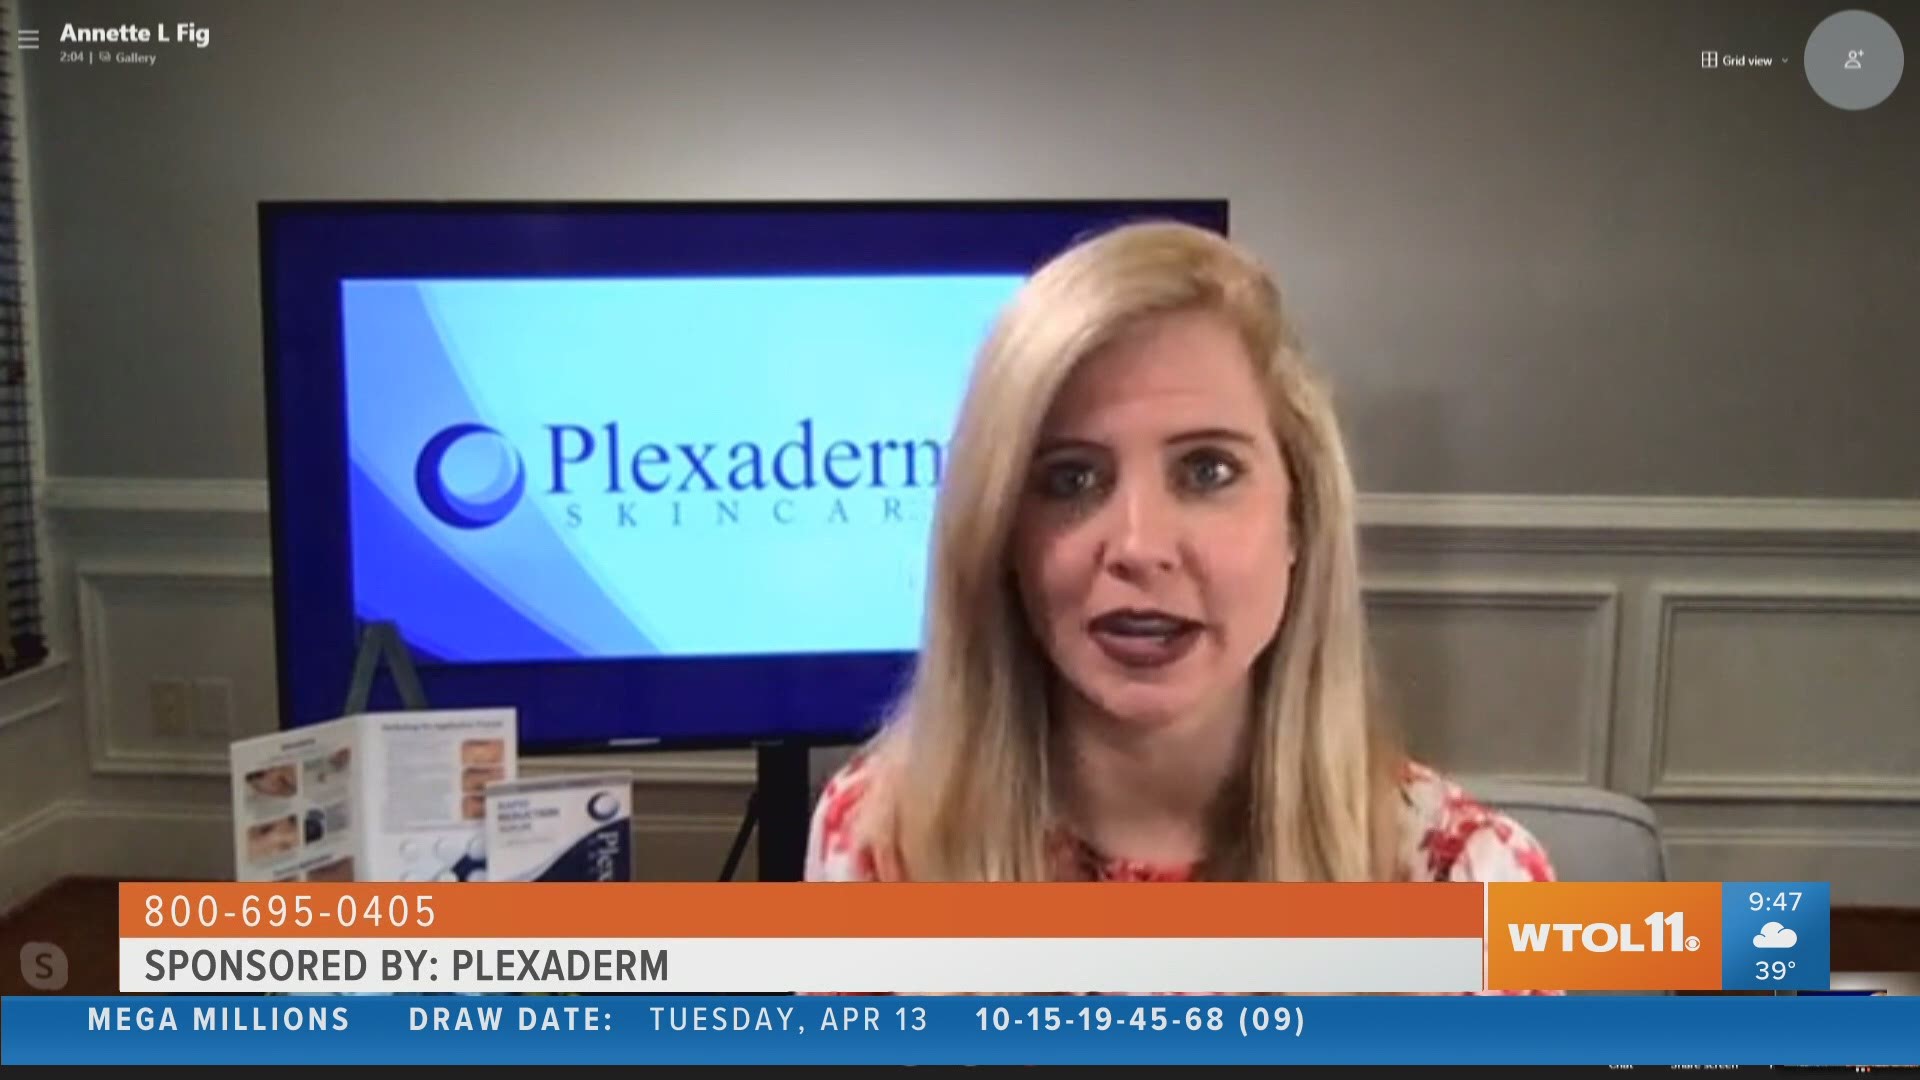 Have you always wanted a whiter, brighter smile? Don't wait, try Plexaderm today!